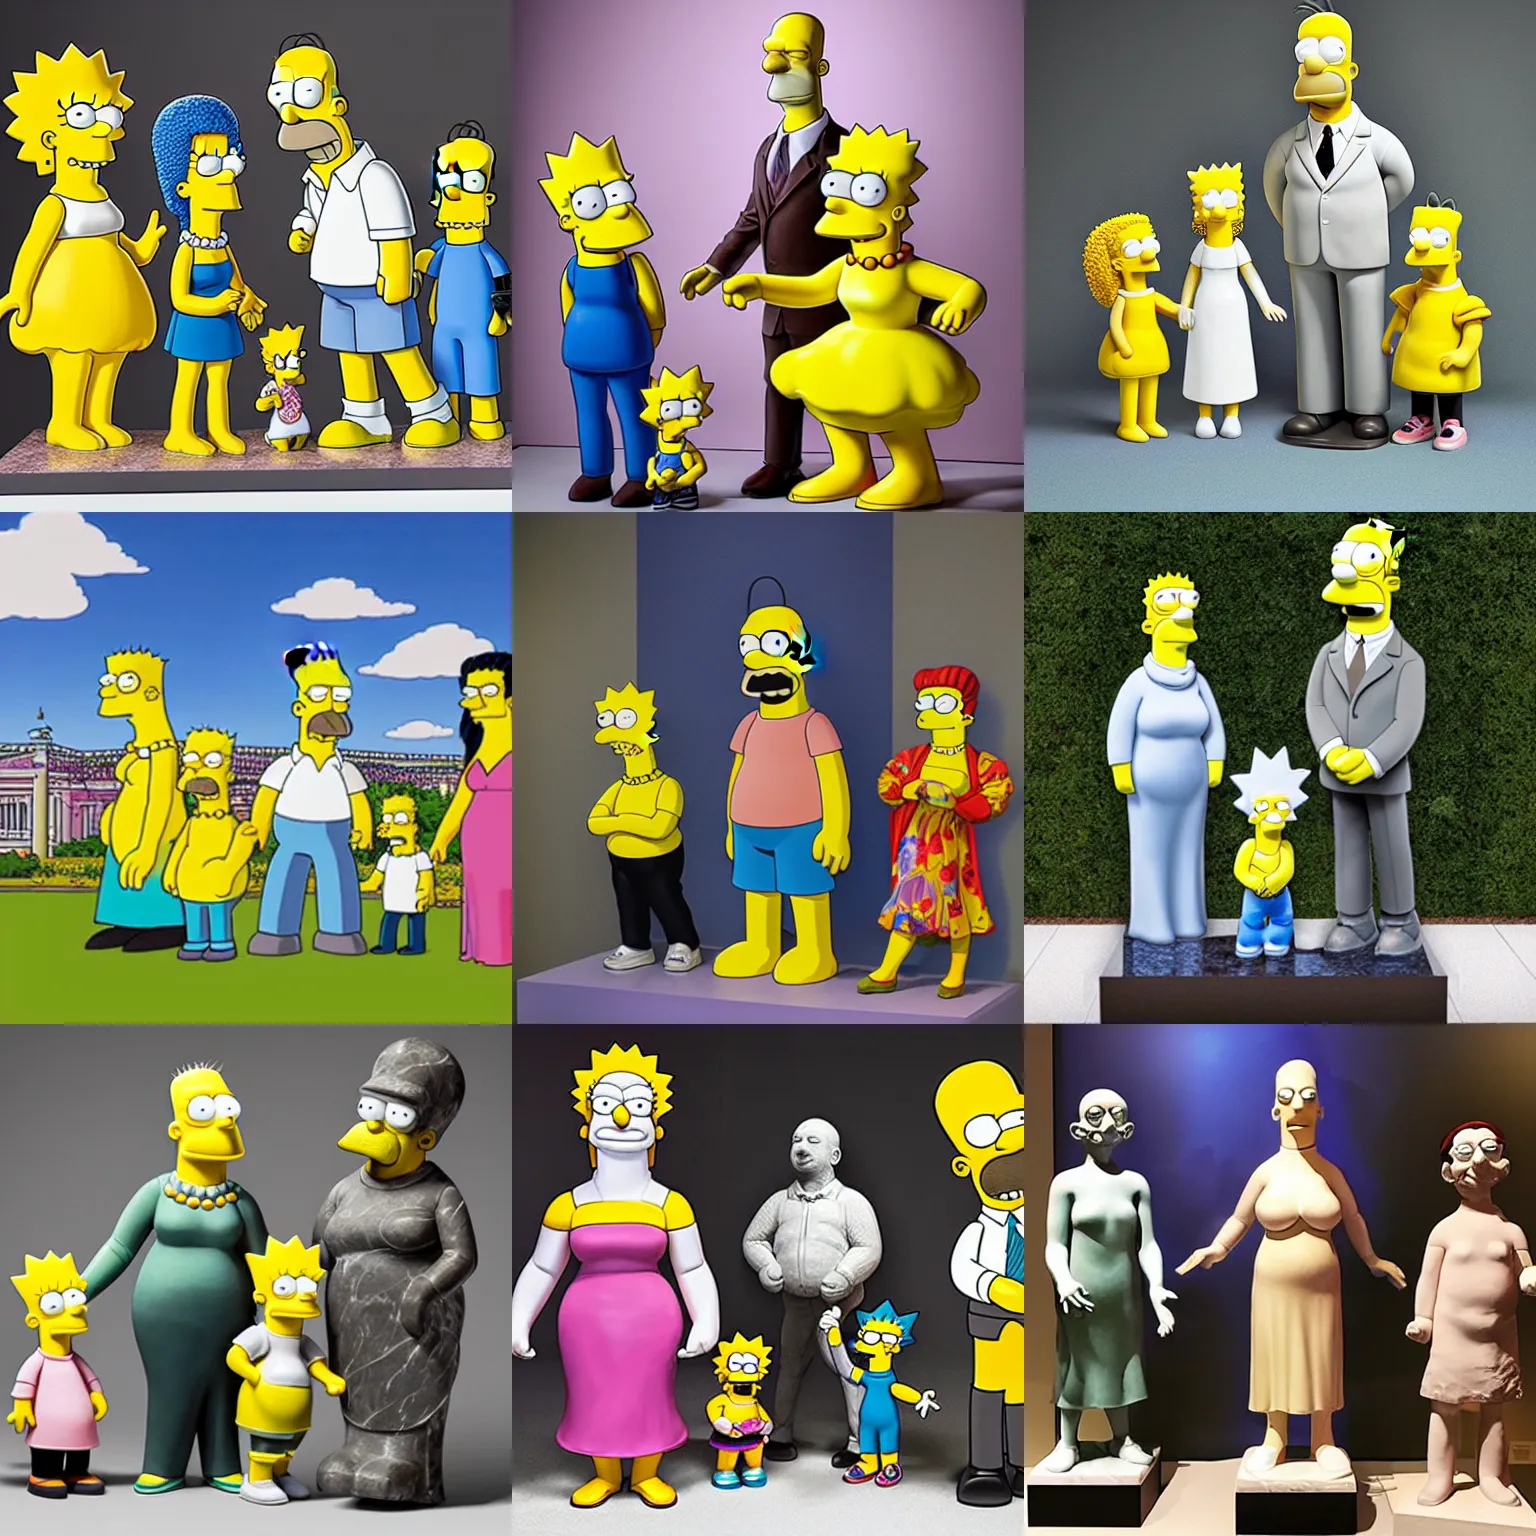 Prompt: marble statue of The Simpsons family created by Michelango, museum exhibit